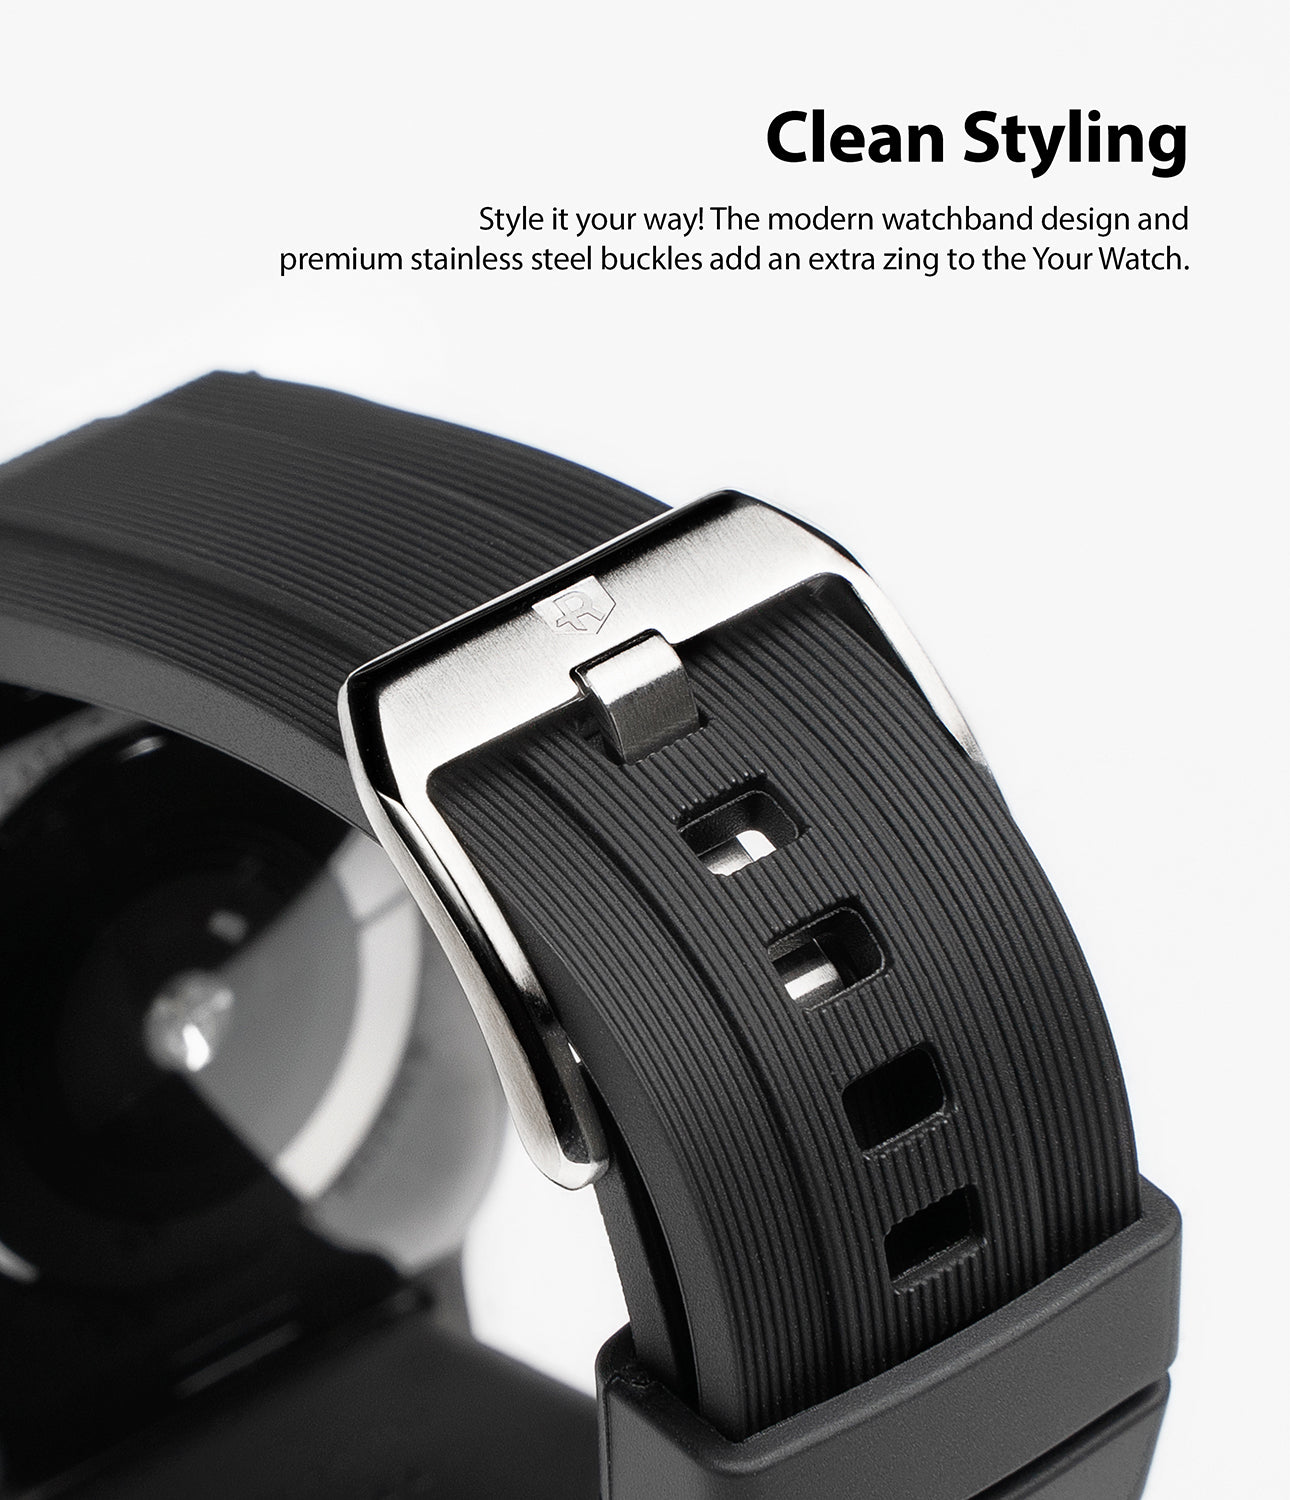 clean styling - premium stainless steel buckles add an extra zing to watch